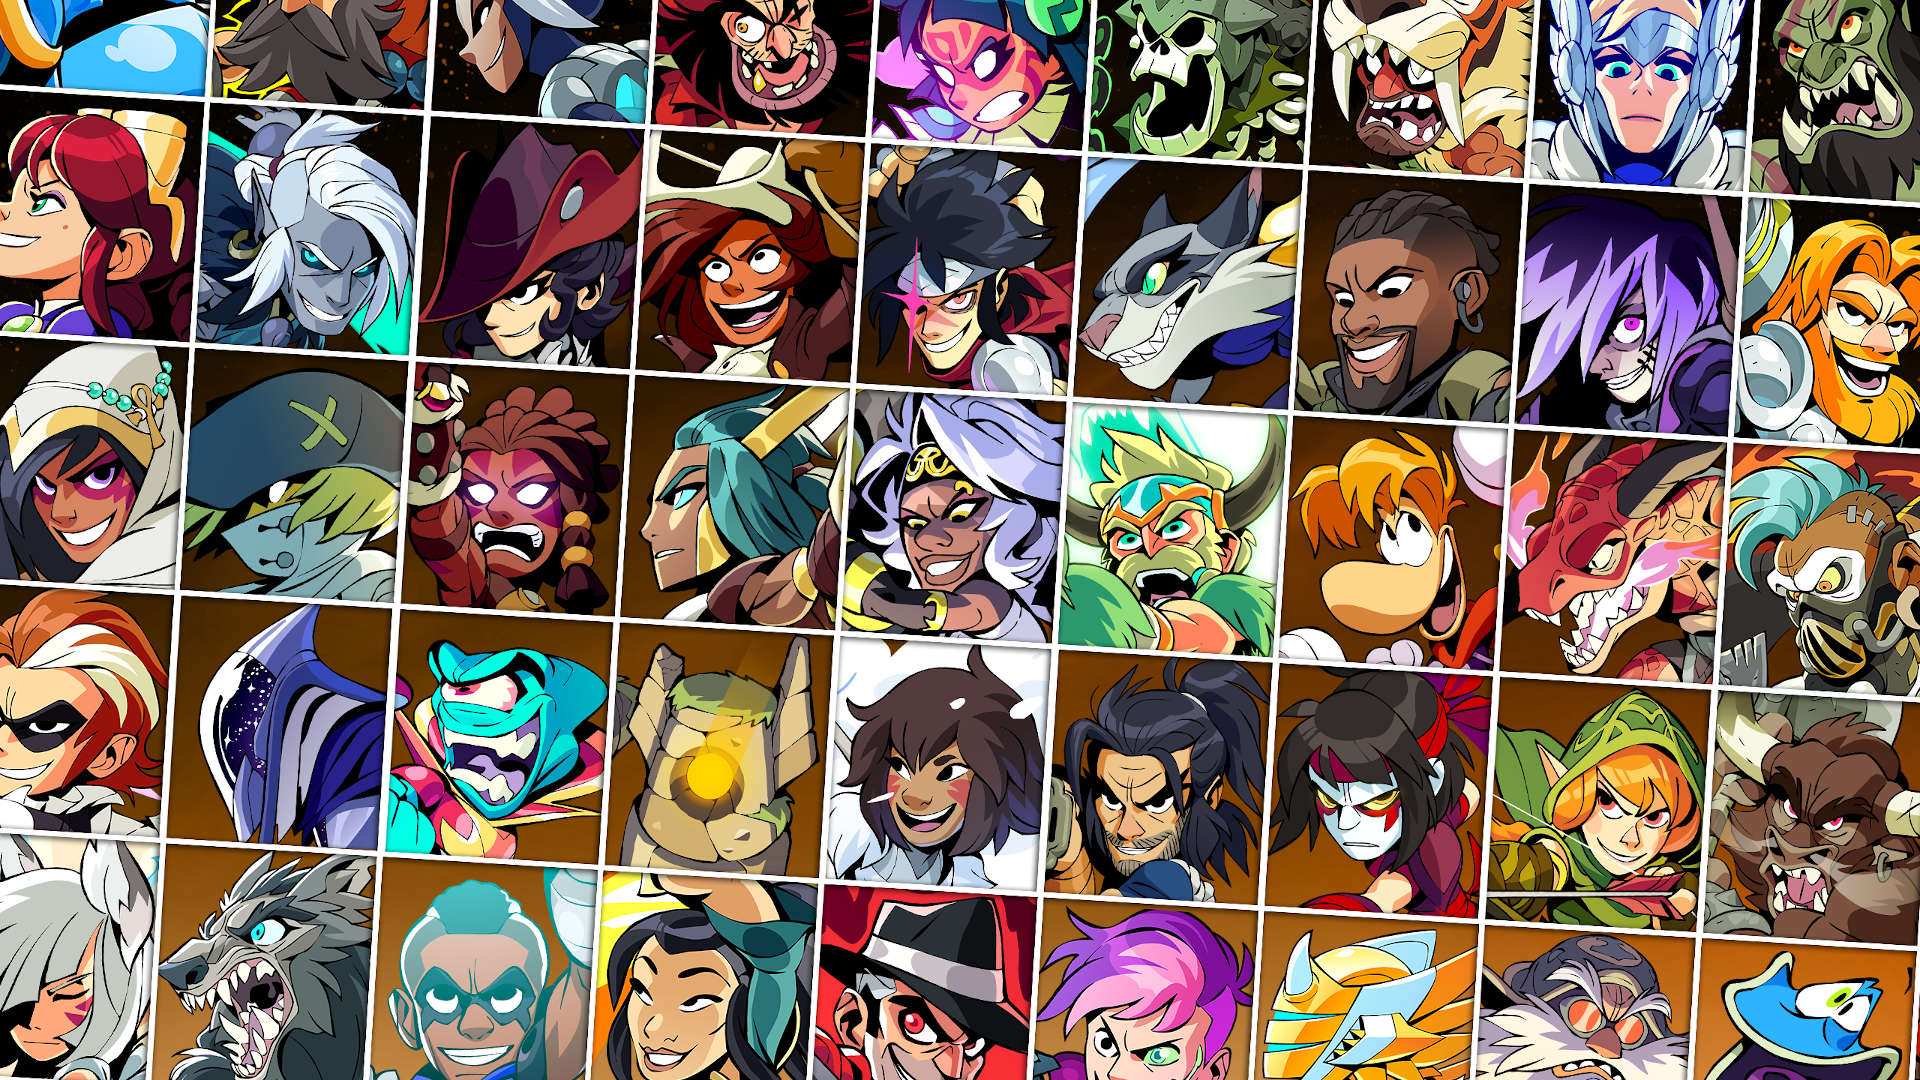 Best mobile multiplayer games: Brawlhalla. Image shows a selection of the game's playable characters.